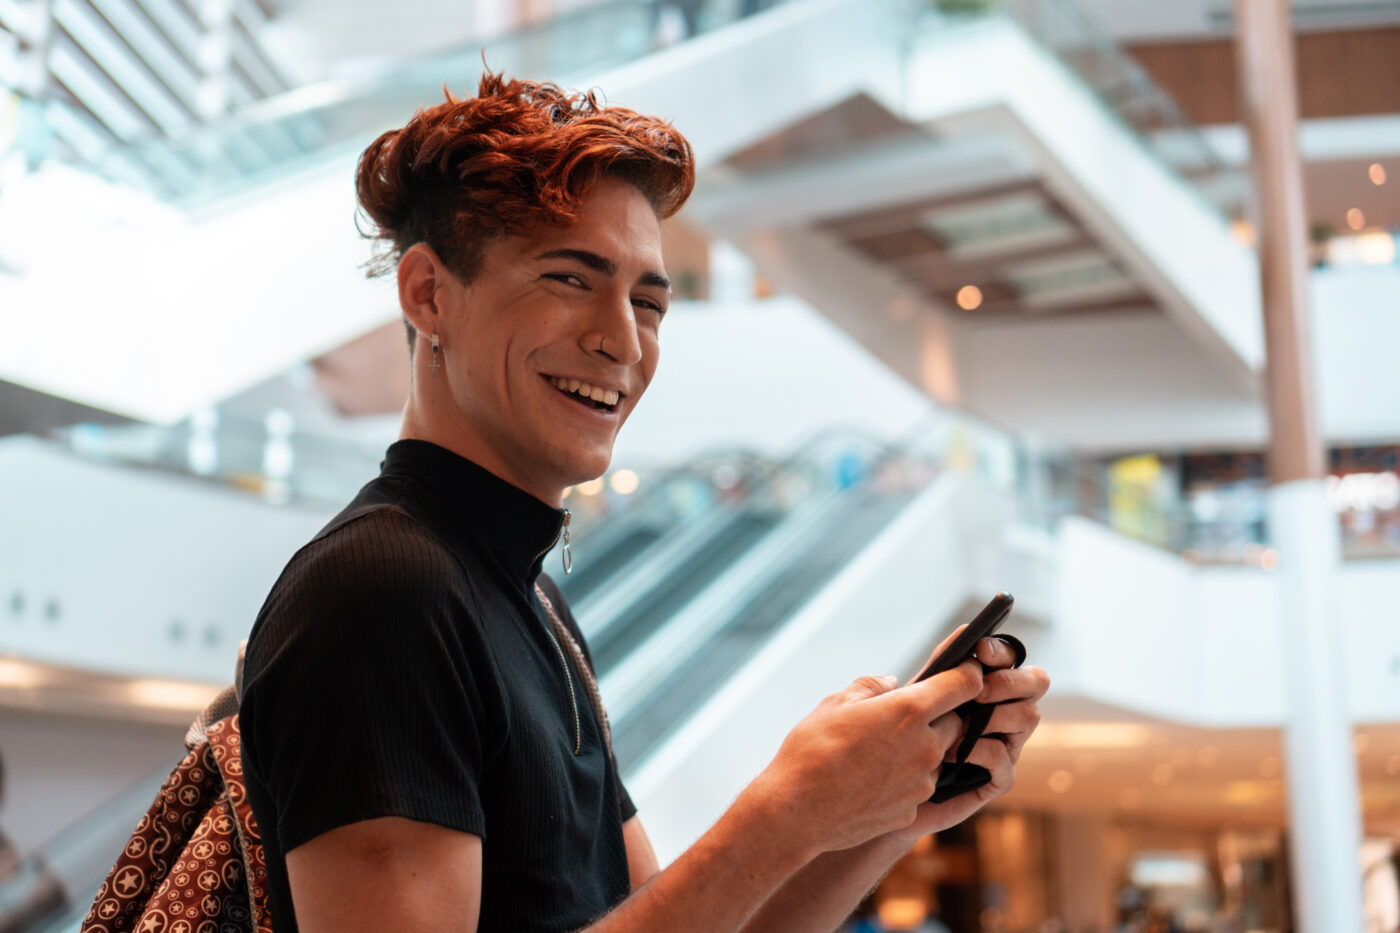 Gen Z person laughing and smiling on phone